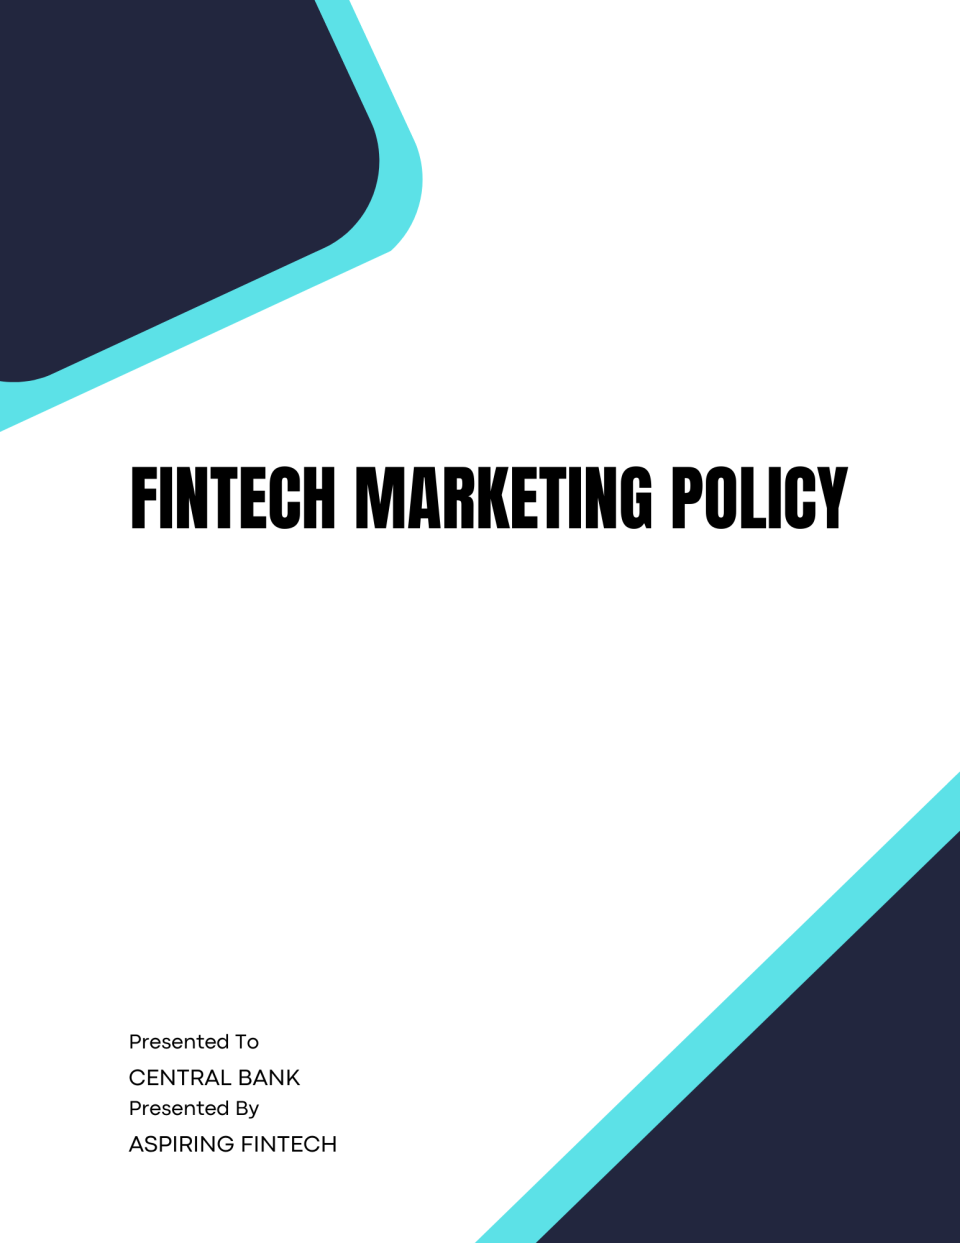 Fintech Marketing Policy Template